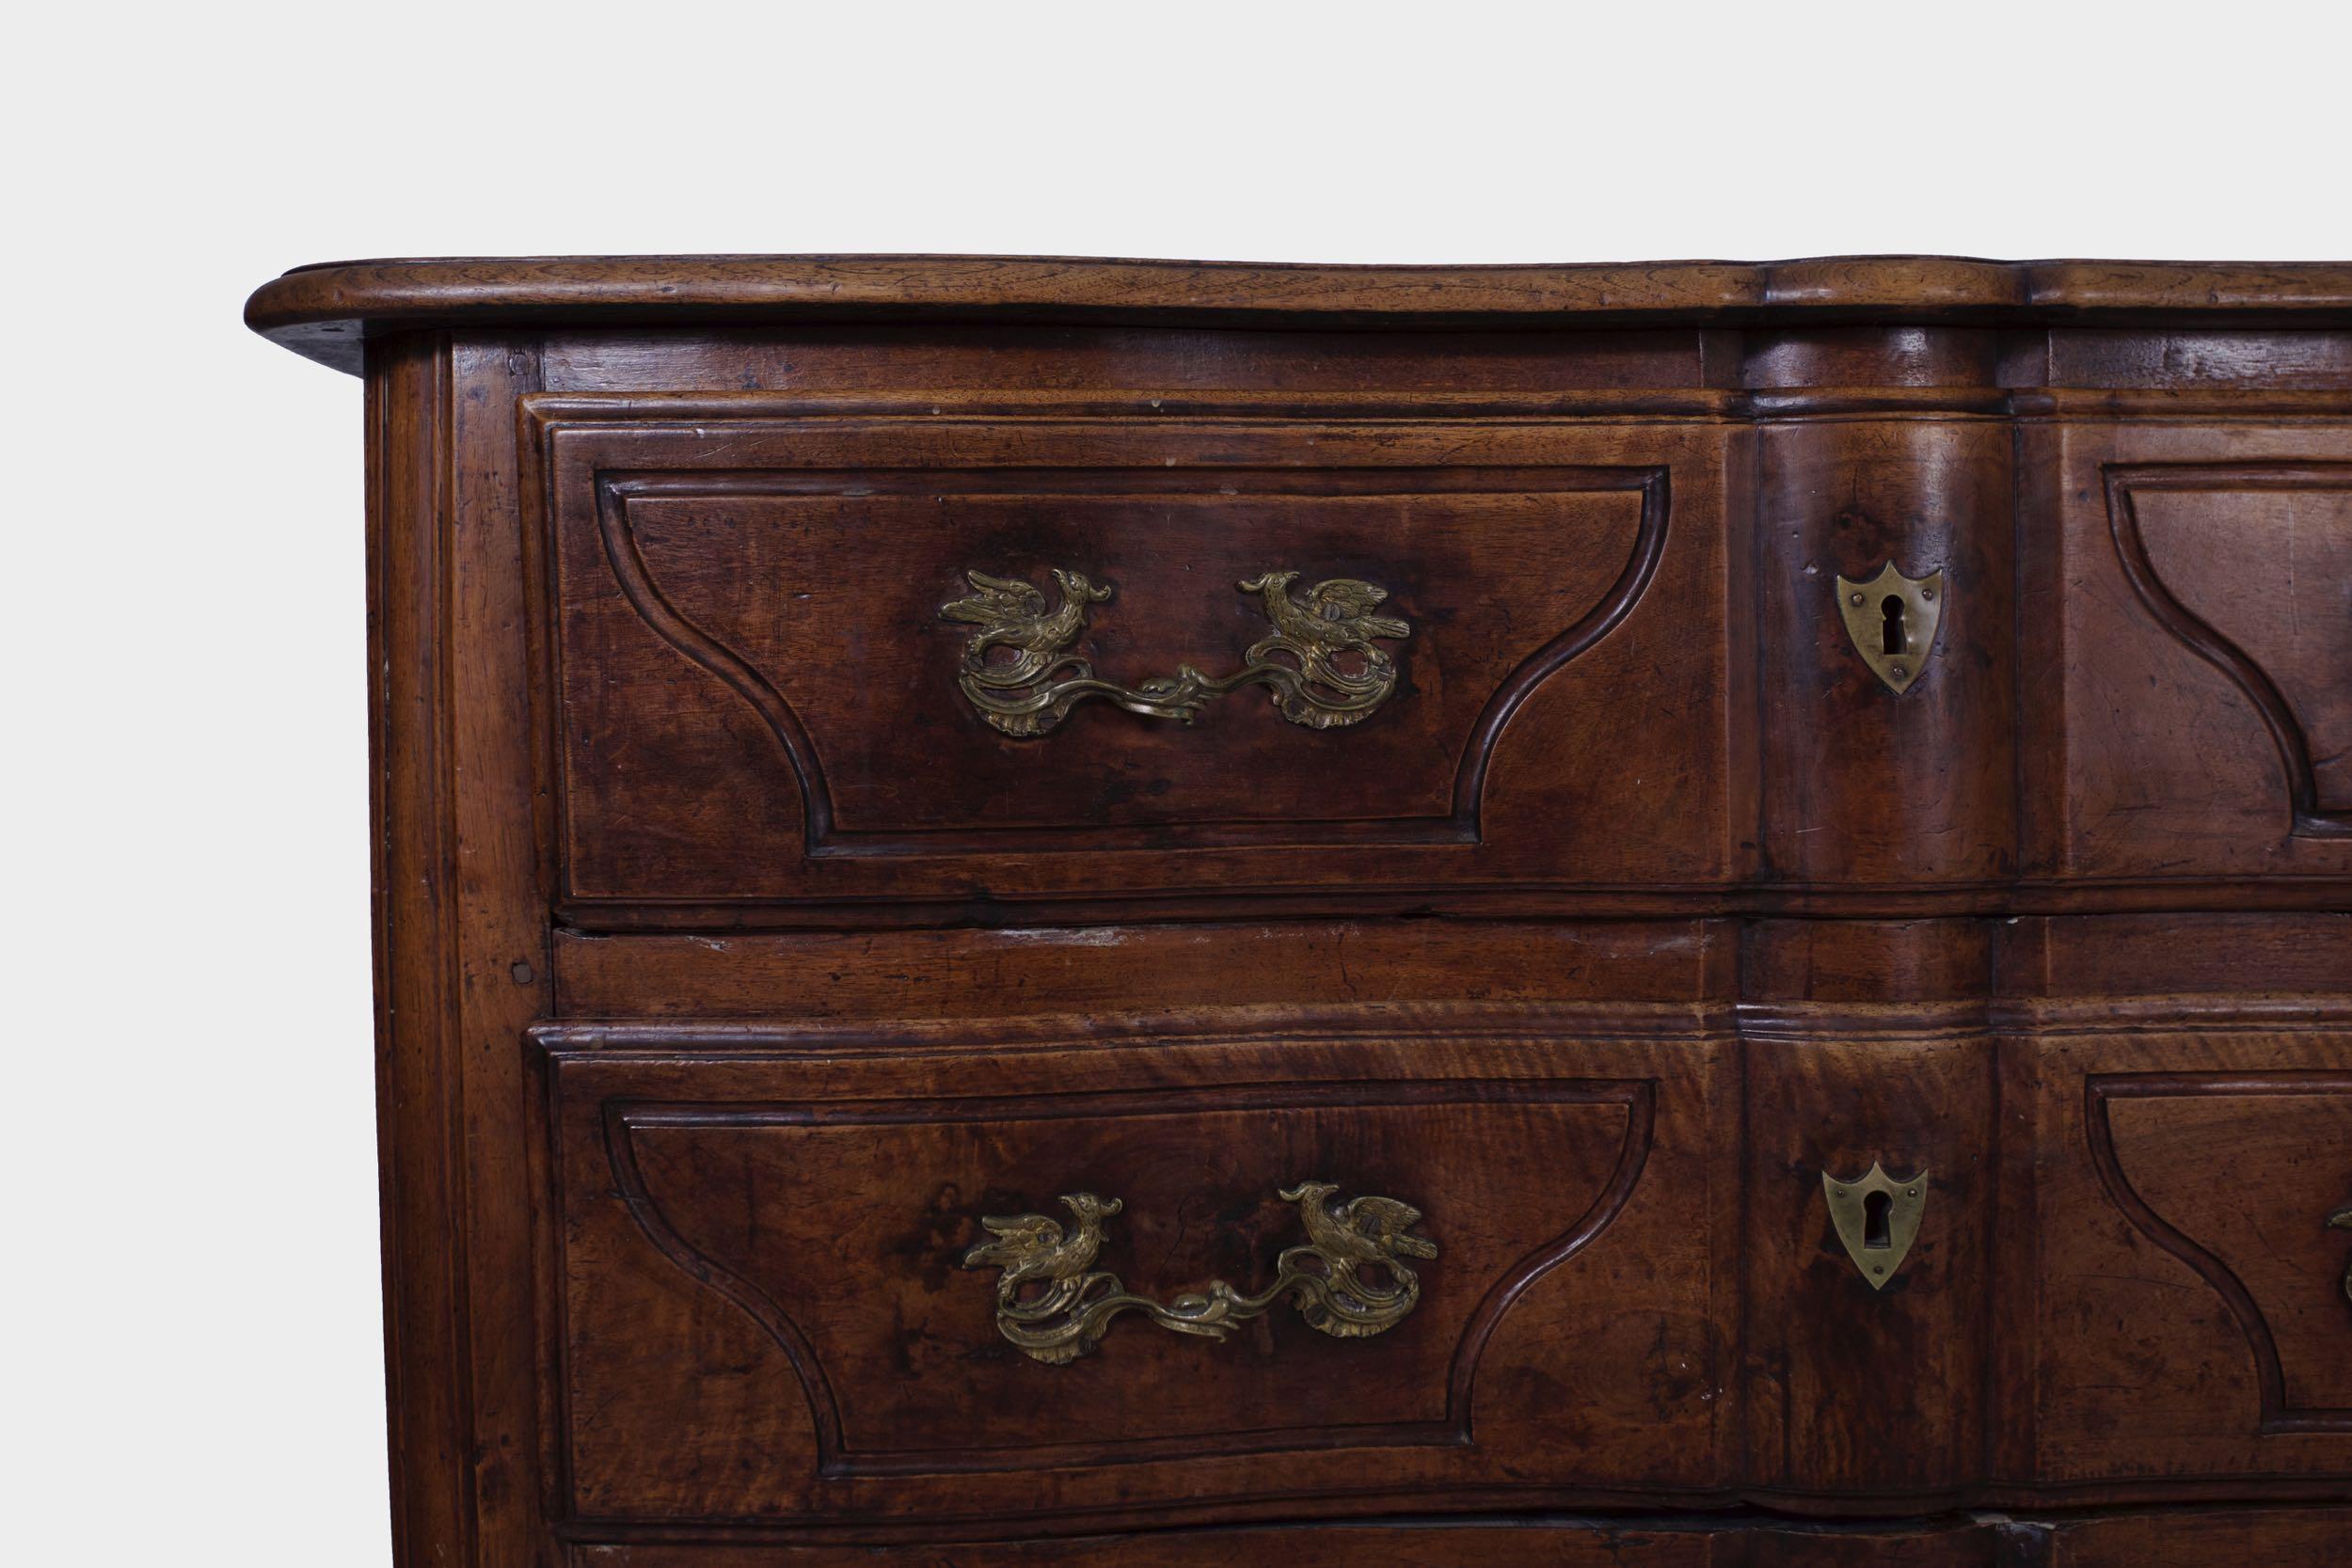 18th Century Regencé Period Walnut Commode Chest of Drawers, circa 1730-1750 For Sale 2